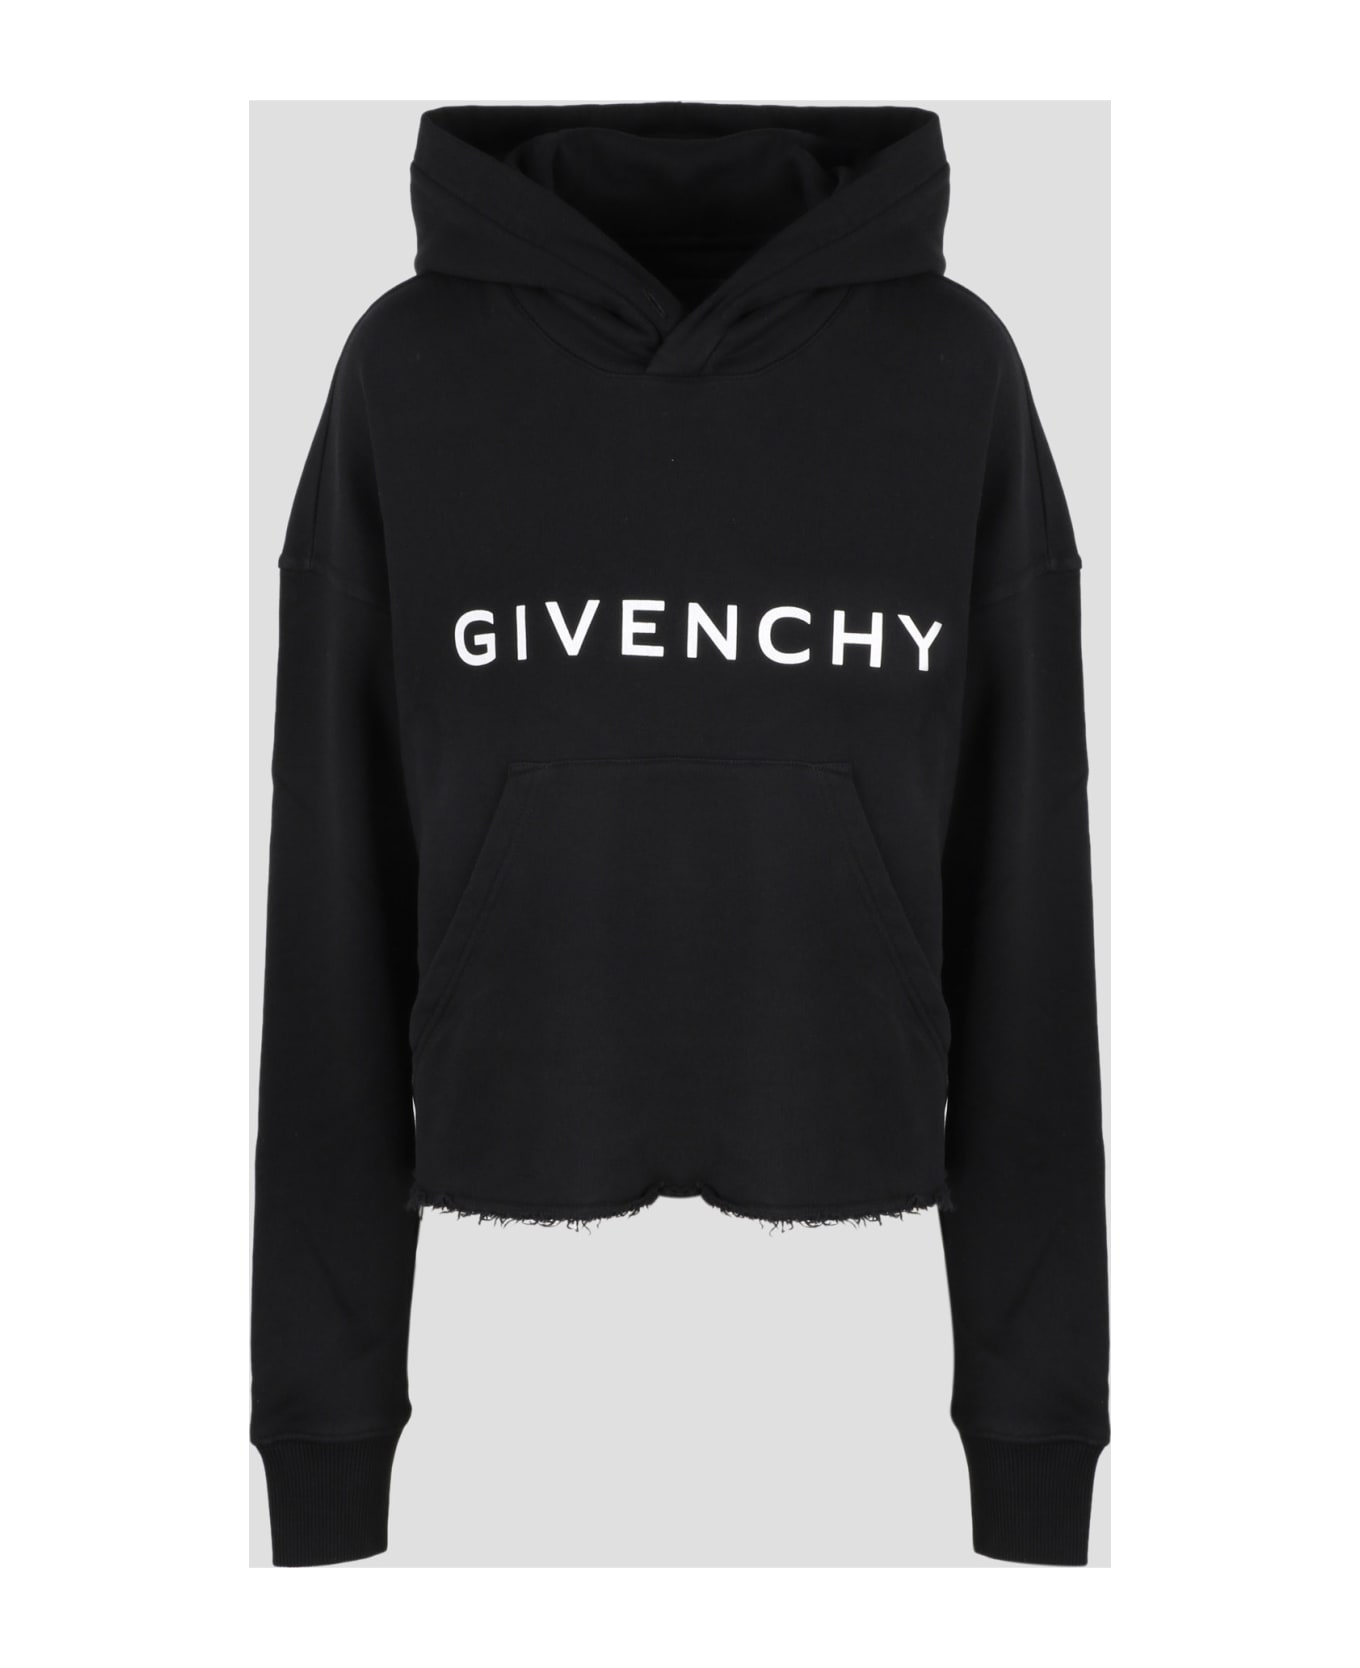 Givenchy Archtype Hoodie - Black